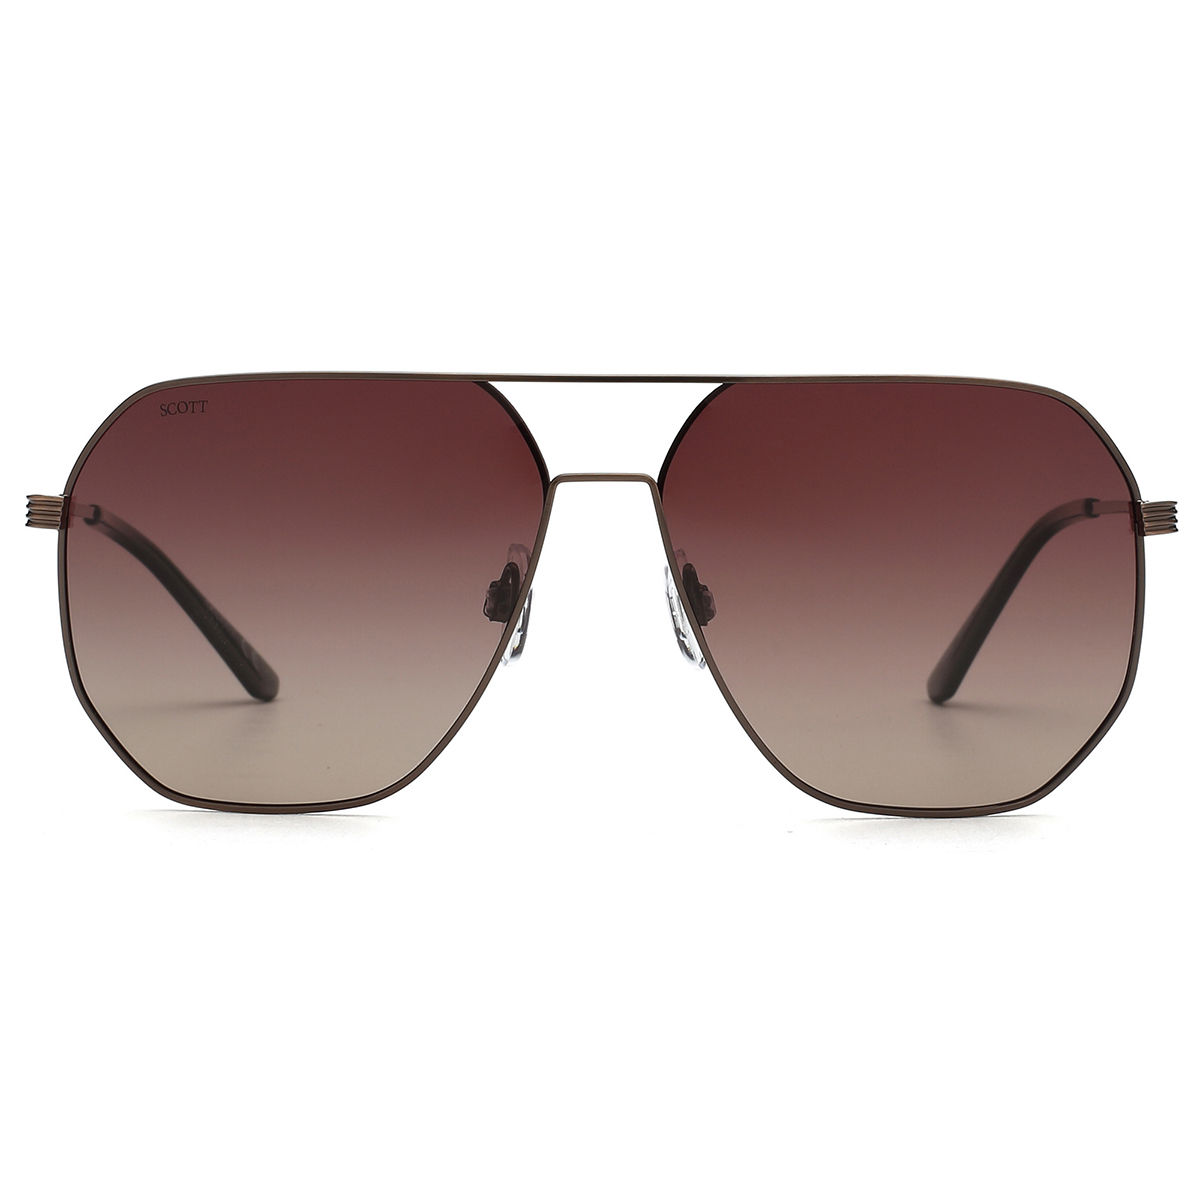 Designer Flower Lens Illesteva Sunglasses With Letter Detailing For Men And  Women Perfect For Travel, Beach And Outdoor Activities Available In Black  And Grey Size 24 From Dachengzi92, $18.93 | DHgate.Com